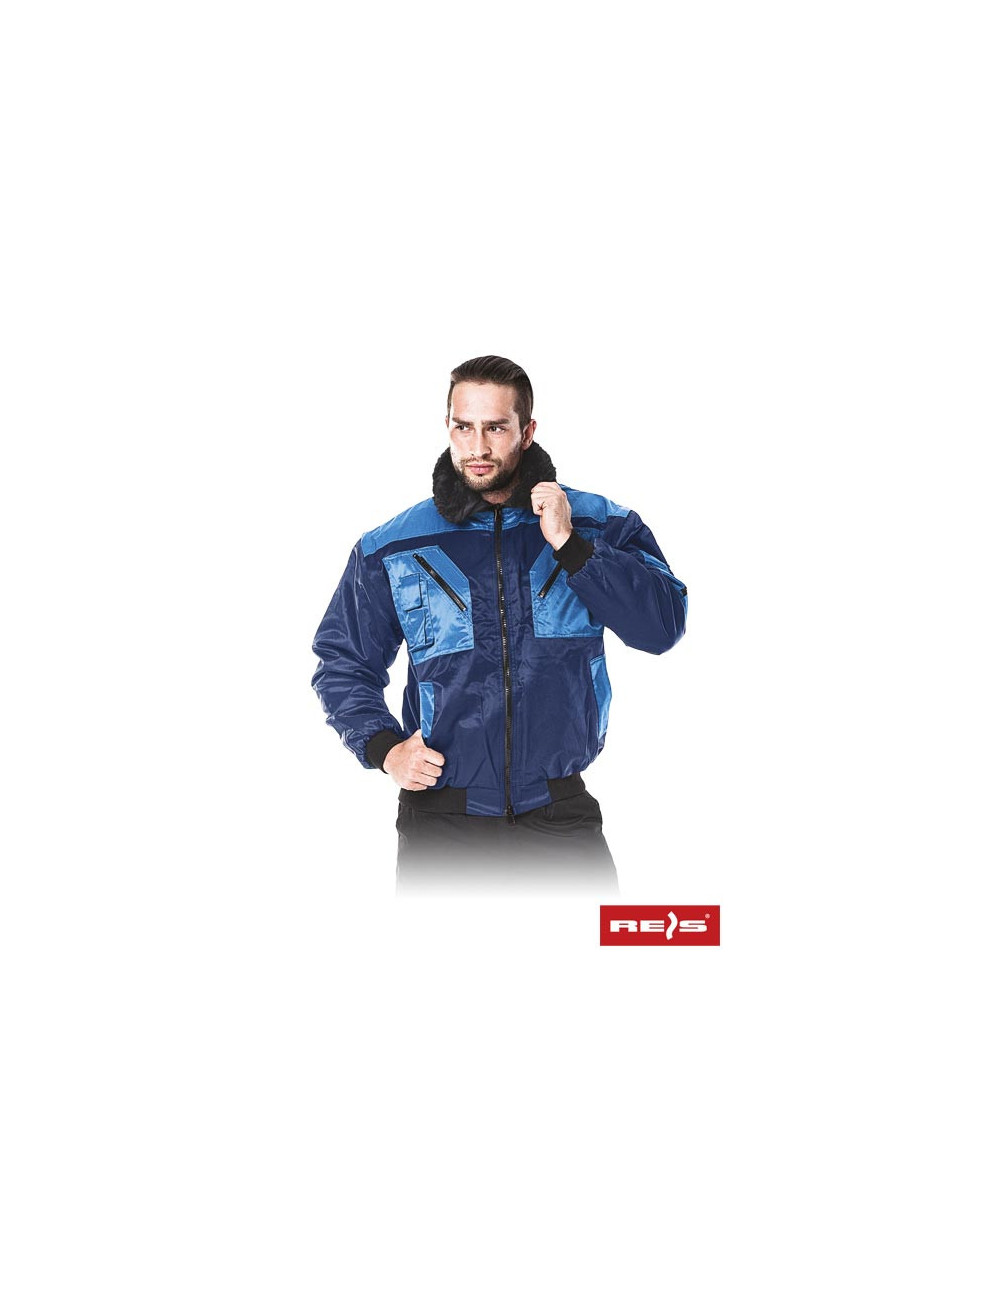 Protective jacket insulated iceberg gn navy-blue Reis